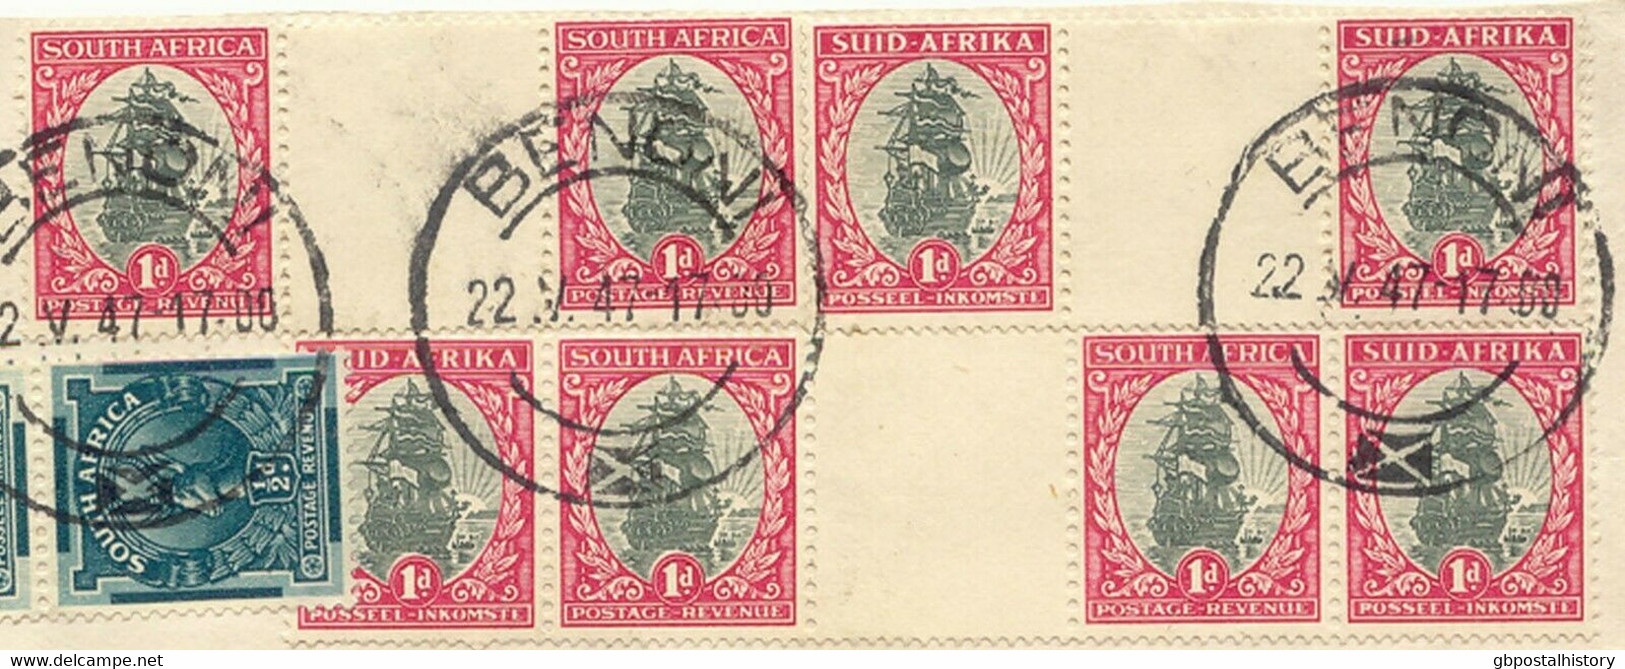 SOUTH AFRICA 1947 VF Early After War AIRMAIL Cover From BENONI THREE GUTTERPAIRS - Airmail